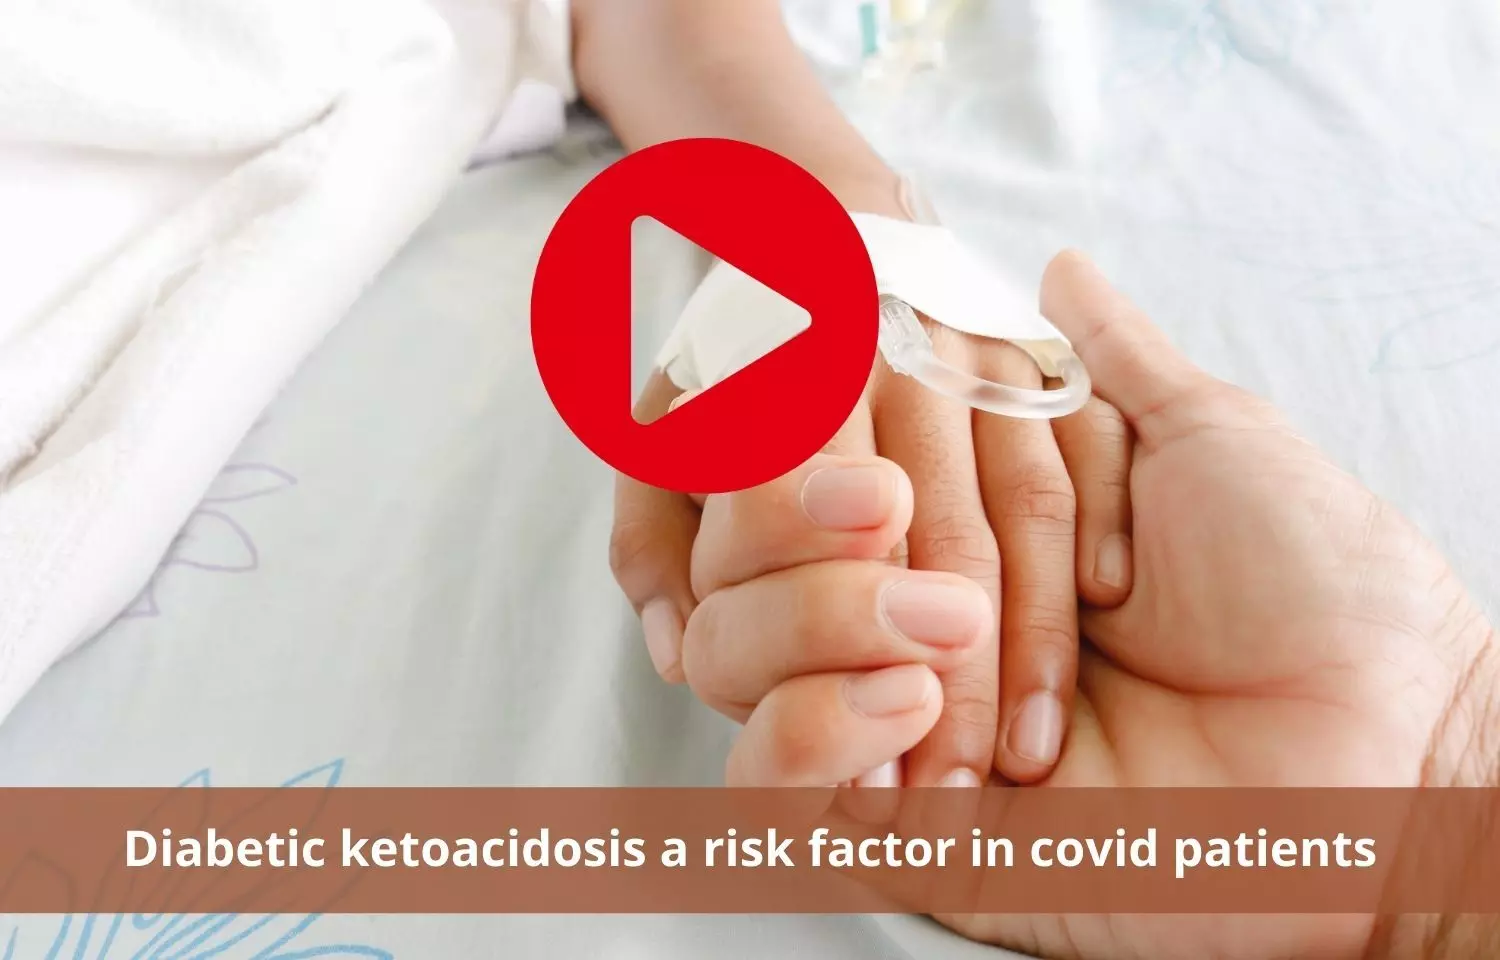 Covid -19 to increase the risk of diabetic ketoacidosis in diabetics